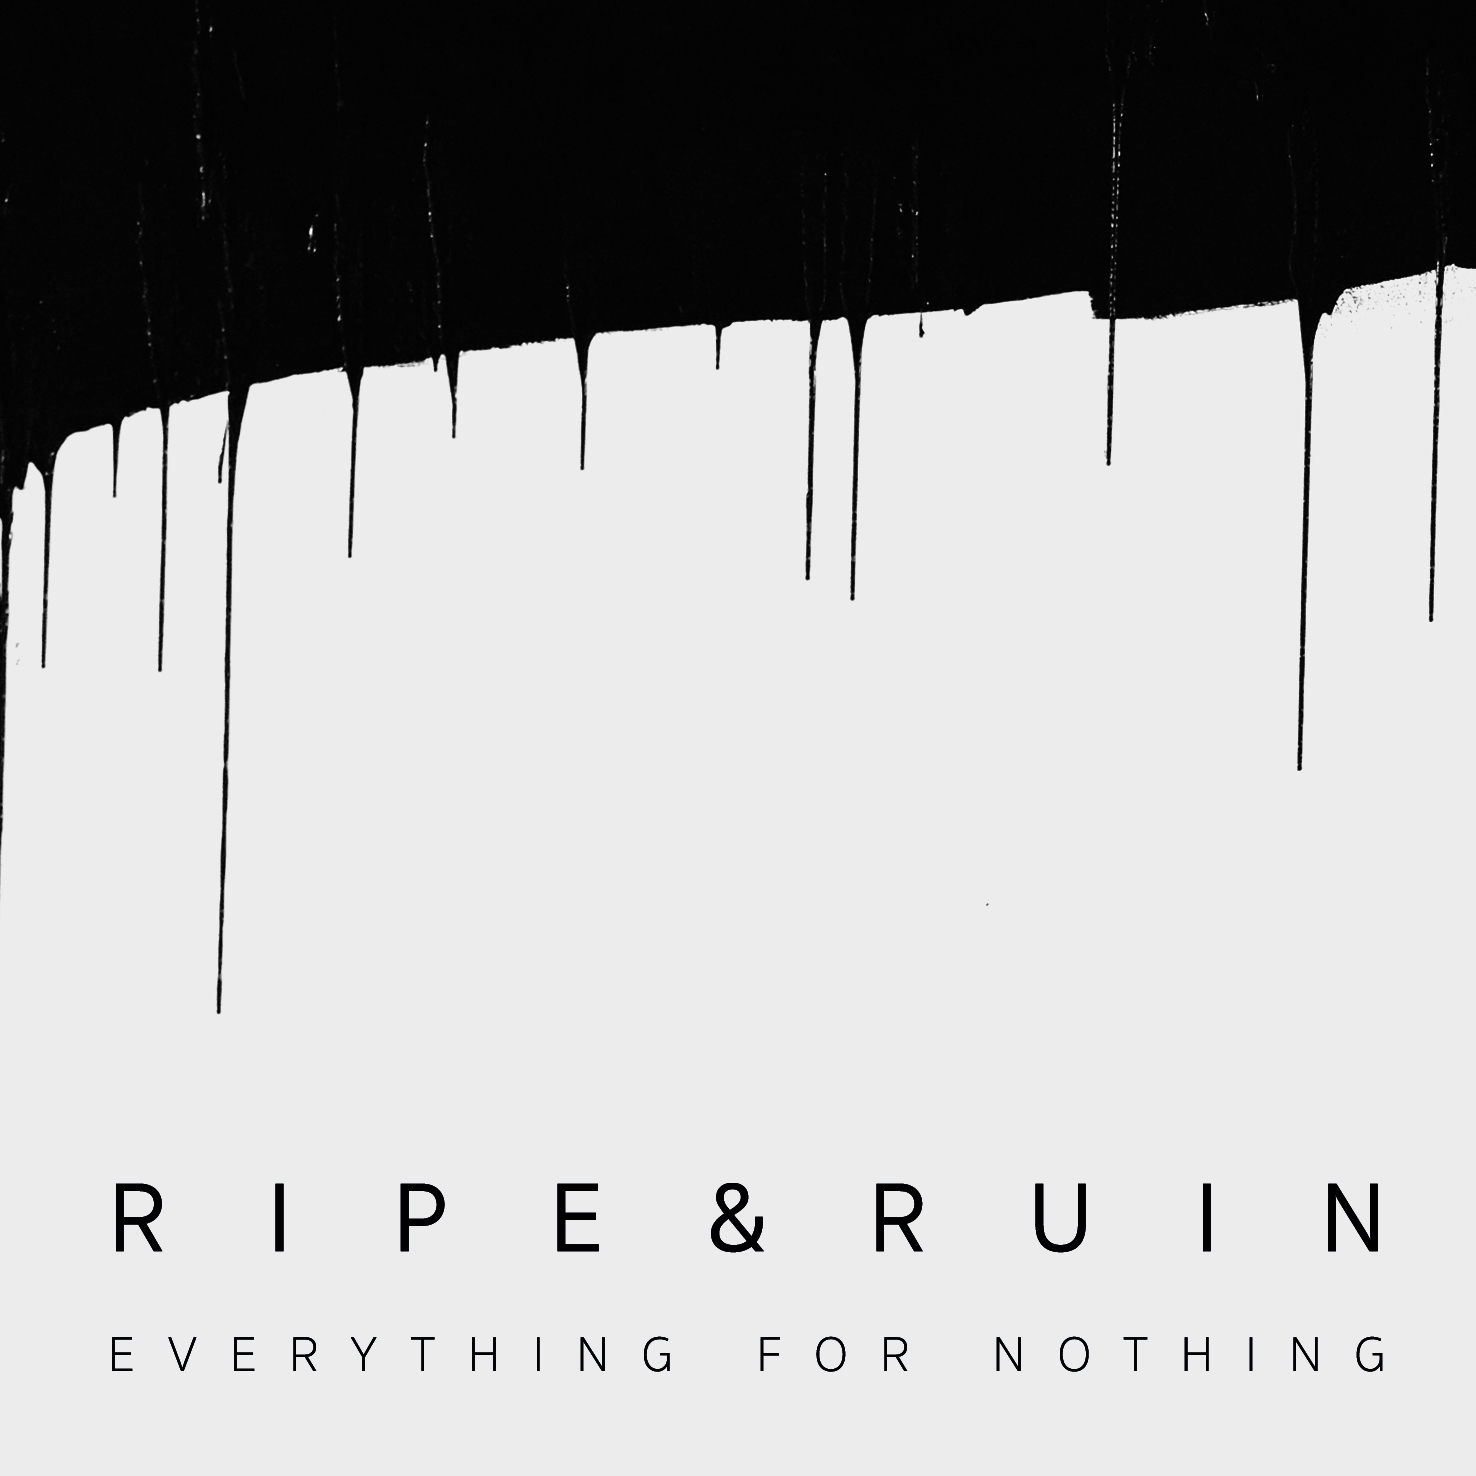 Ripe & Ruin: Everything for Nothing